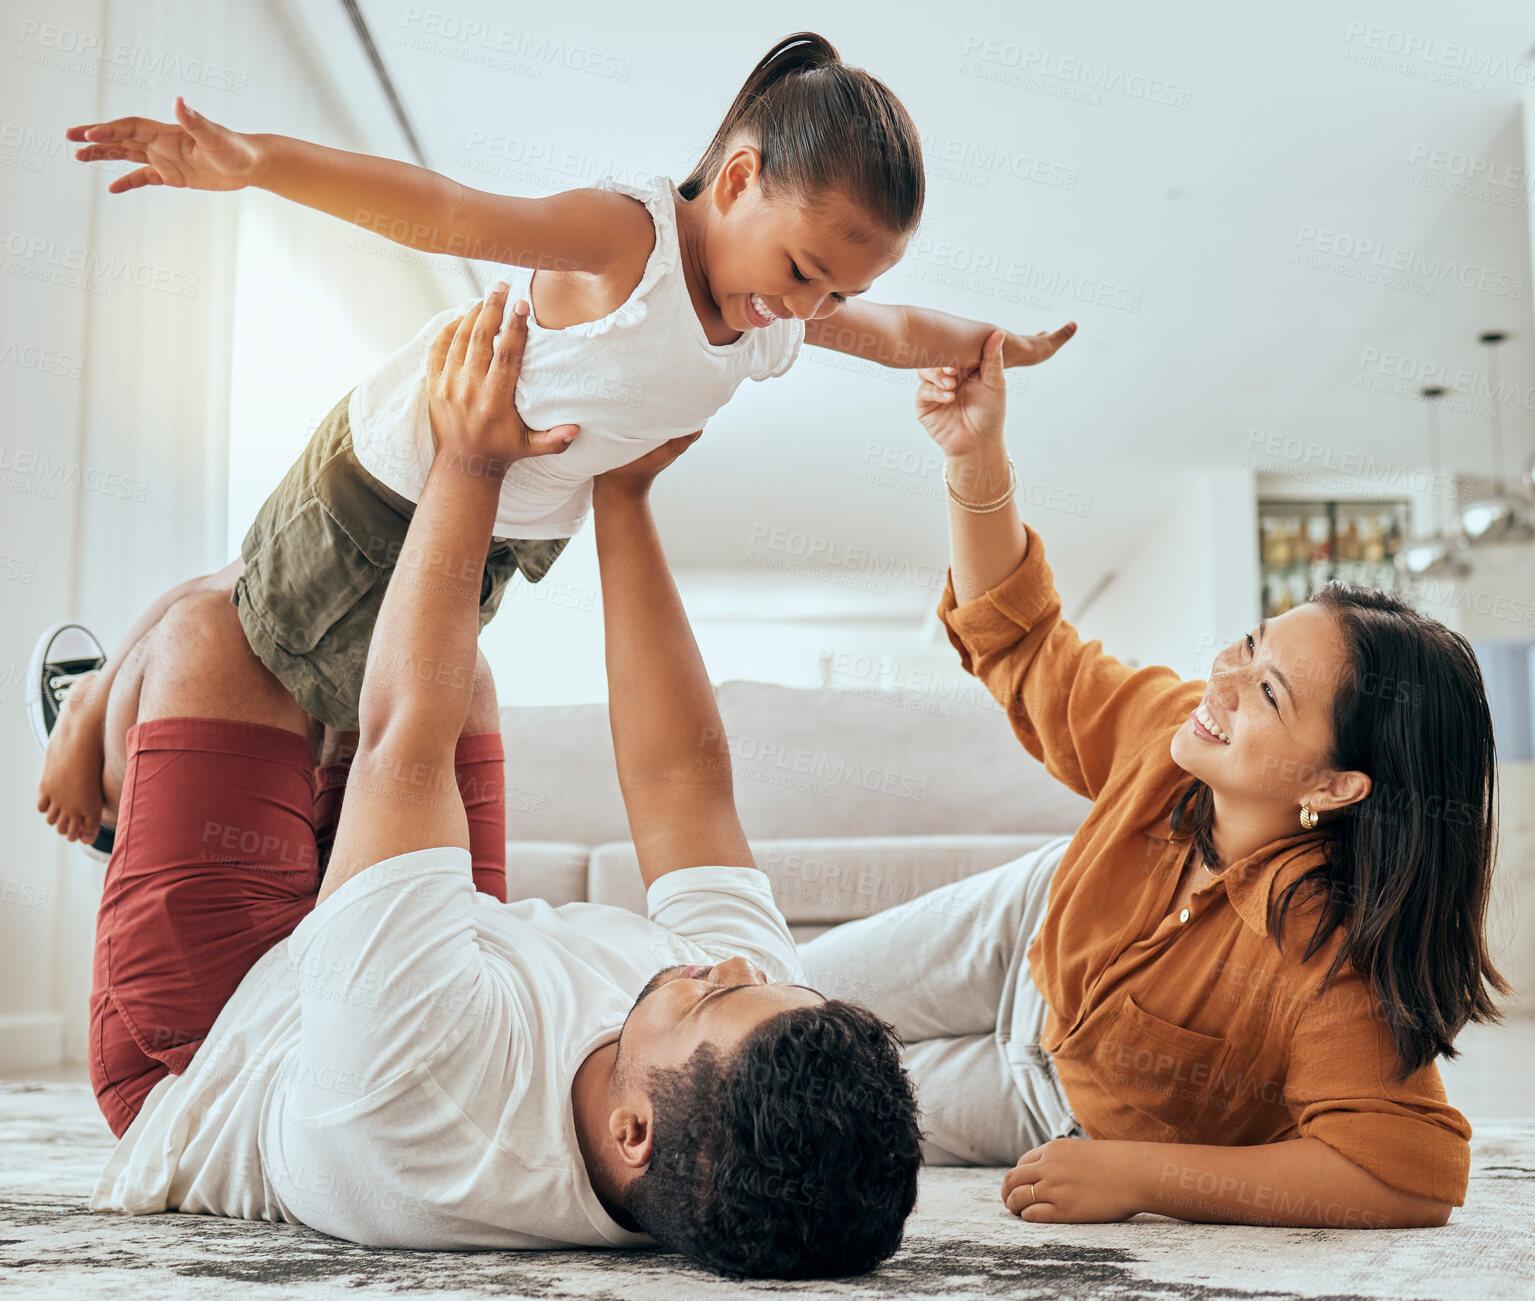 Buy stock photo Love, floor and fun happy family play, bond and enjoy quality time together while excited and relax on ground carpet. Happiness, care and childhood relationship of mom, dad and kid girl playing games